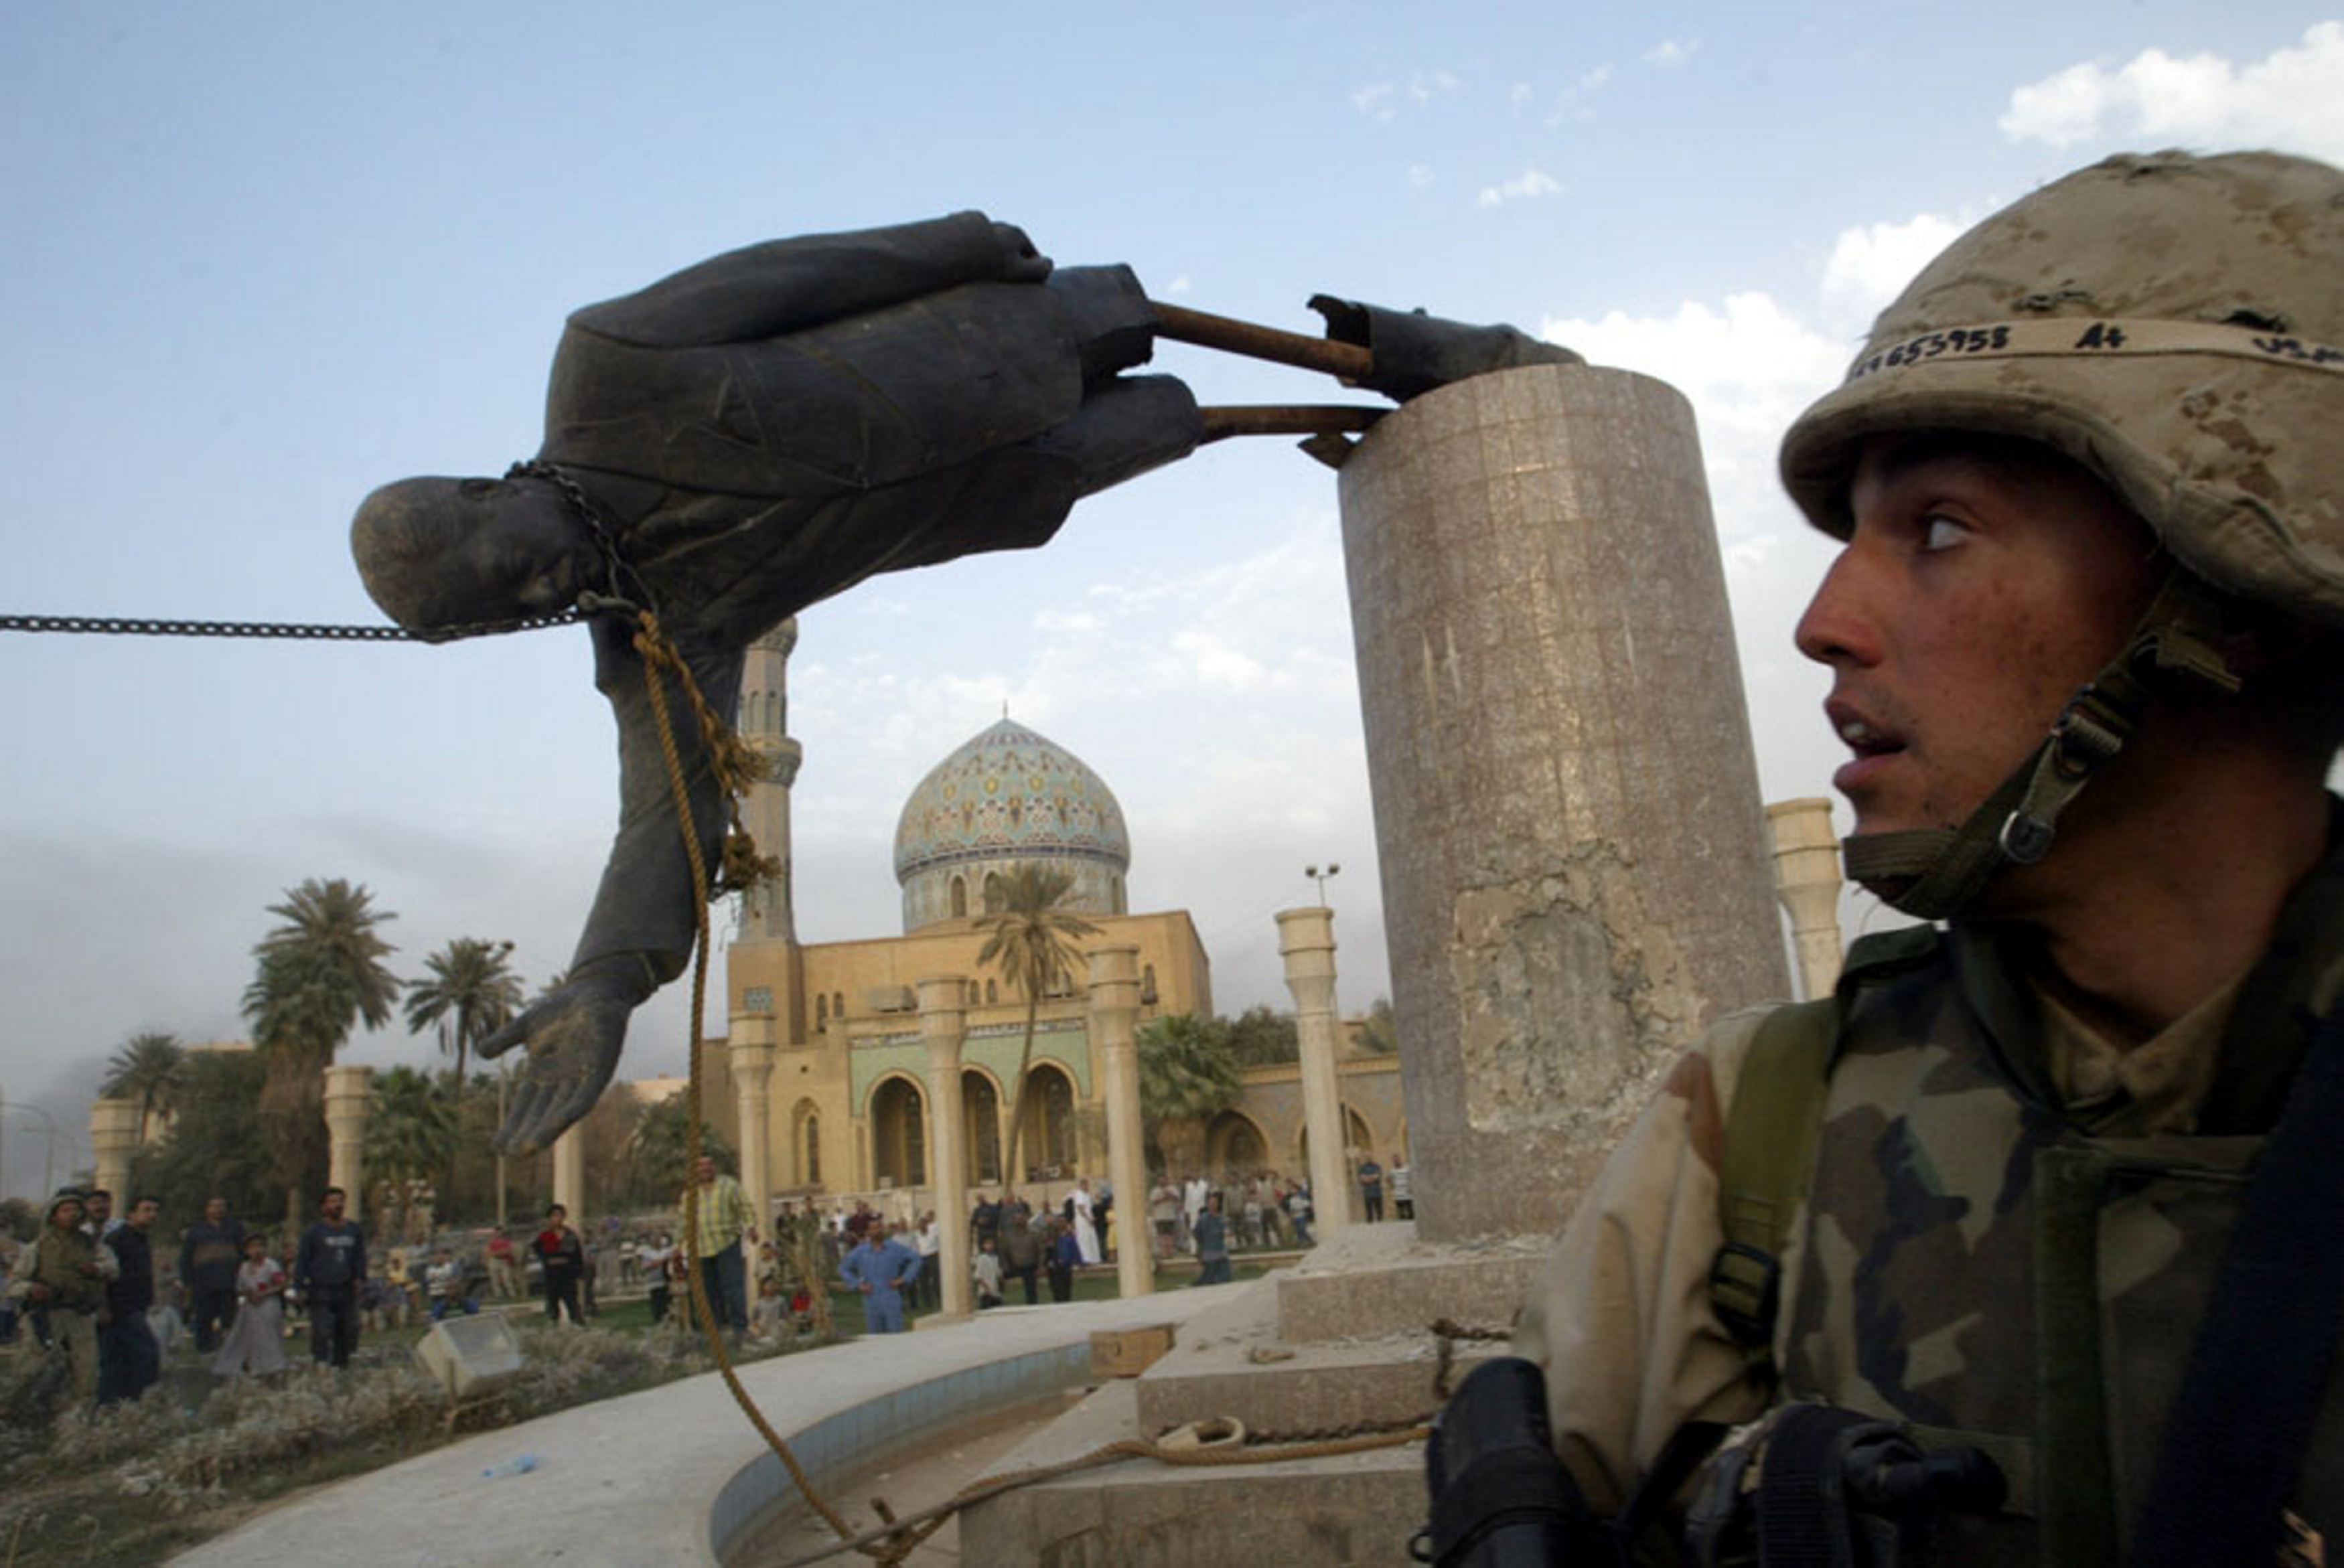 Kirk Dalrymple of the U.S. Marines watches as the statue of Saddam Hussein falls in Baghdad’s Firdos Square in 2003